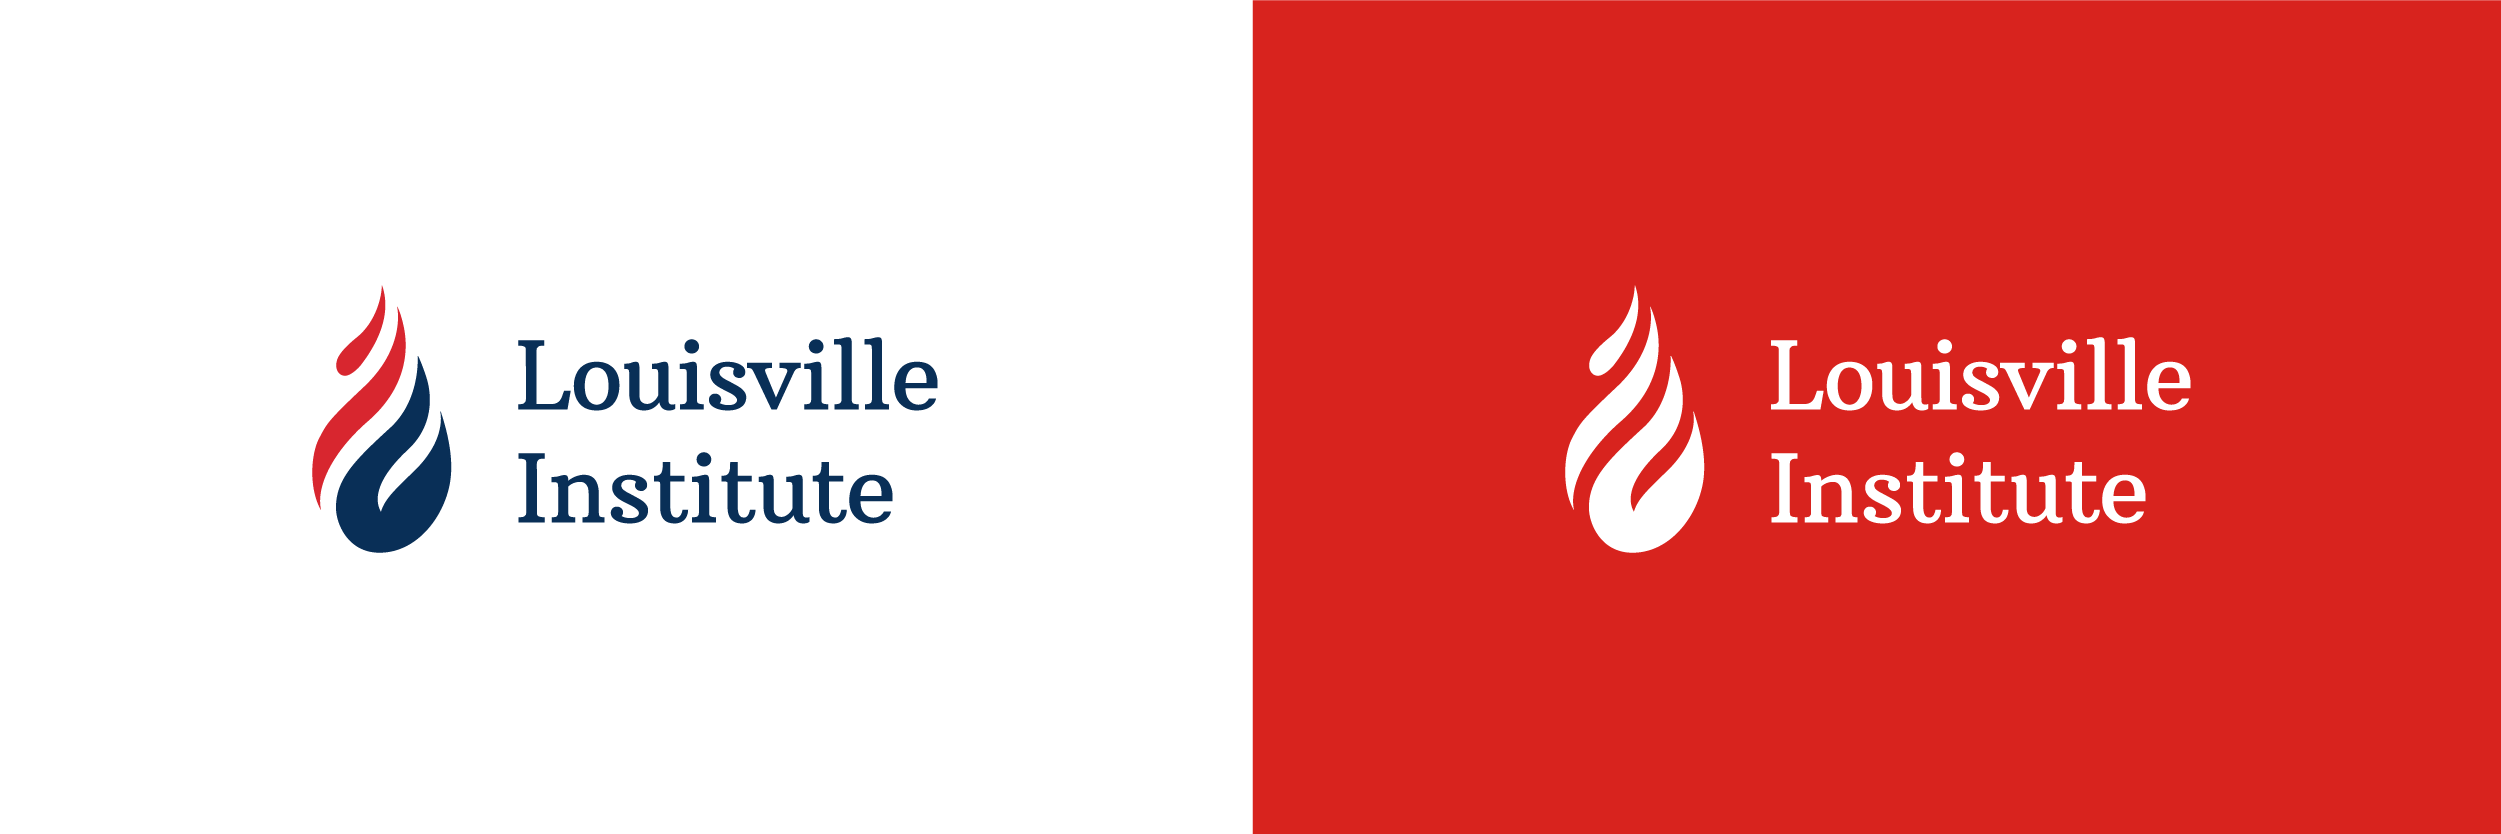 Louisville Institute logo on a white background and on a red background.